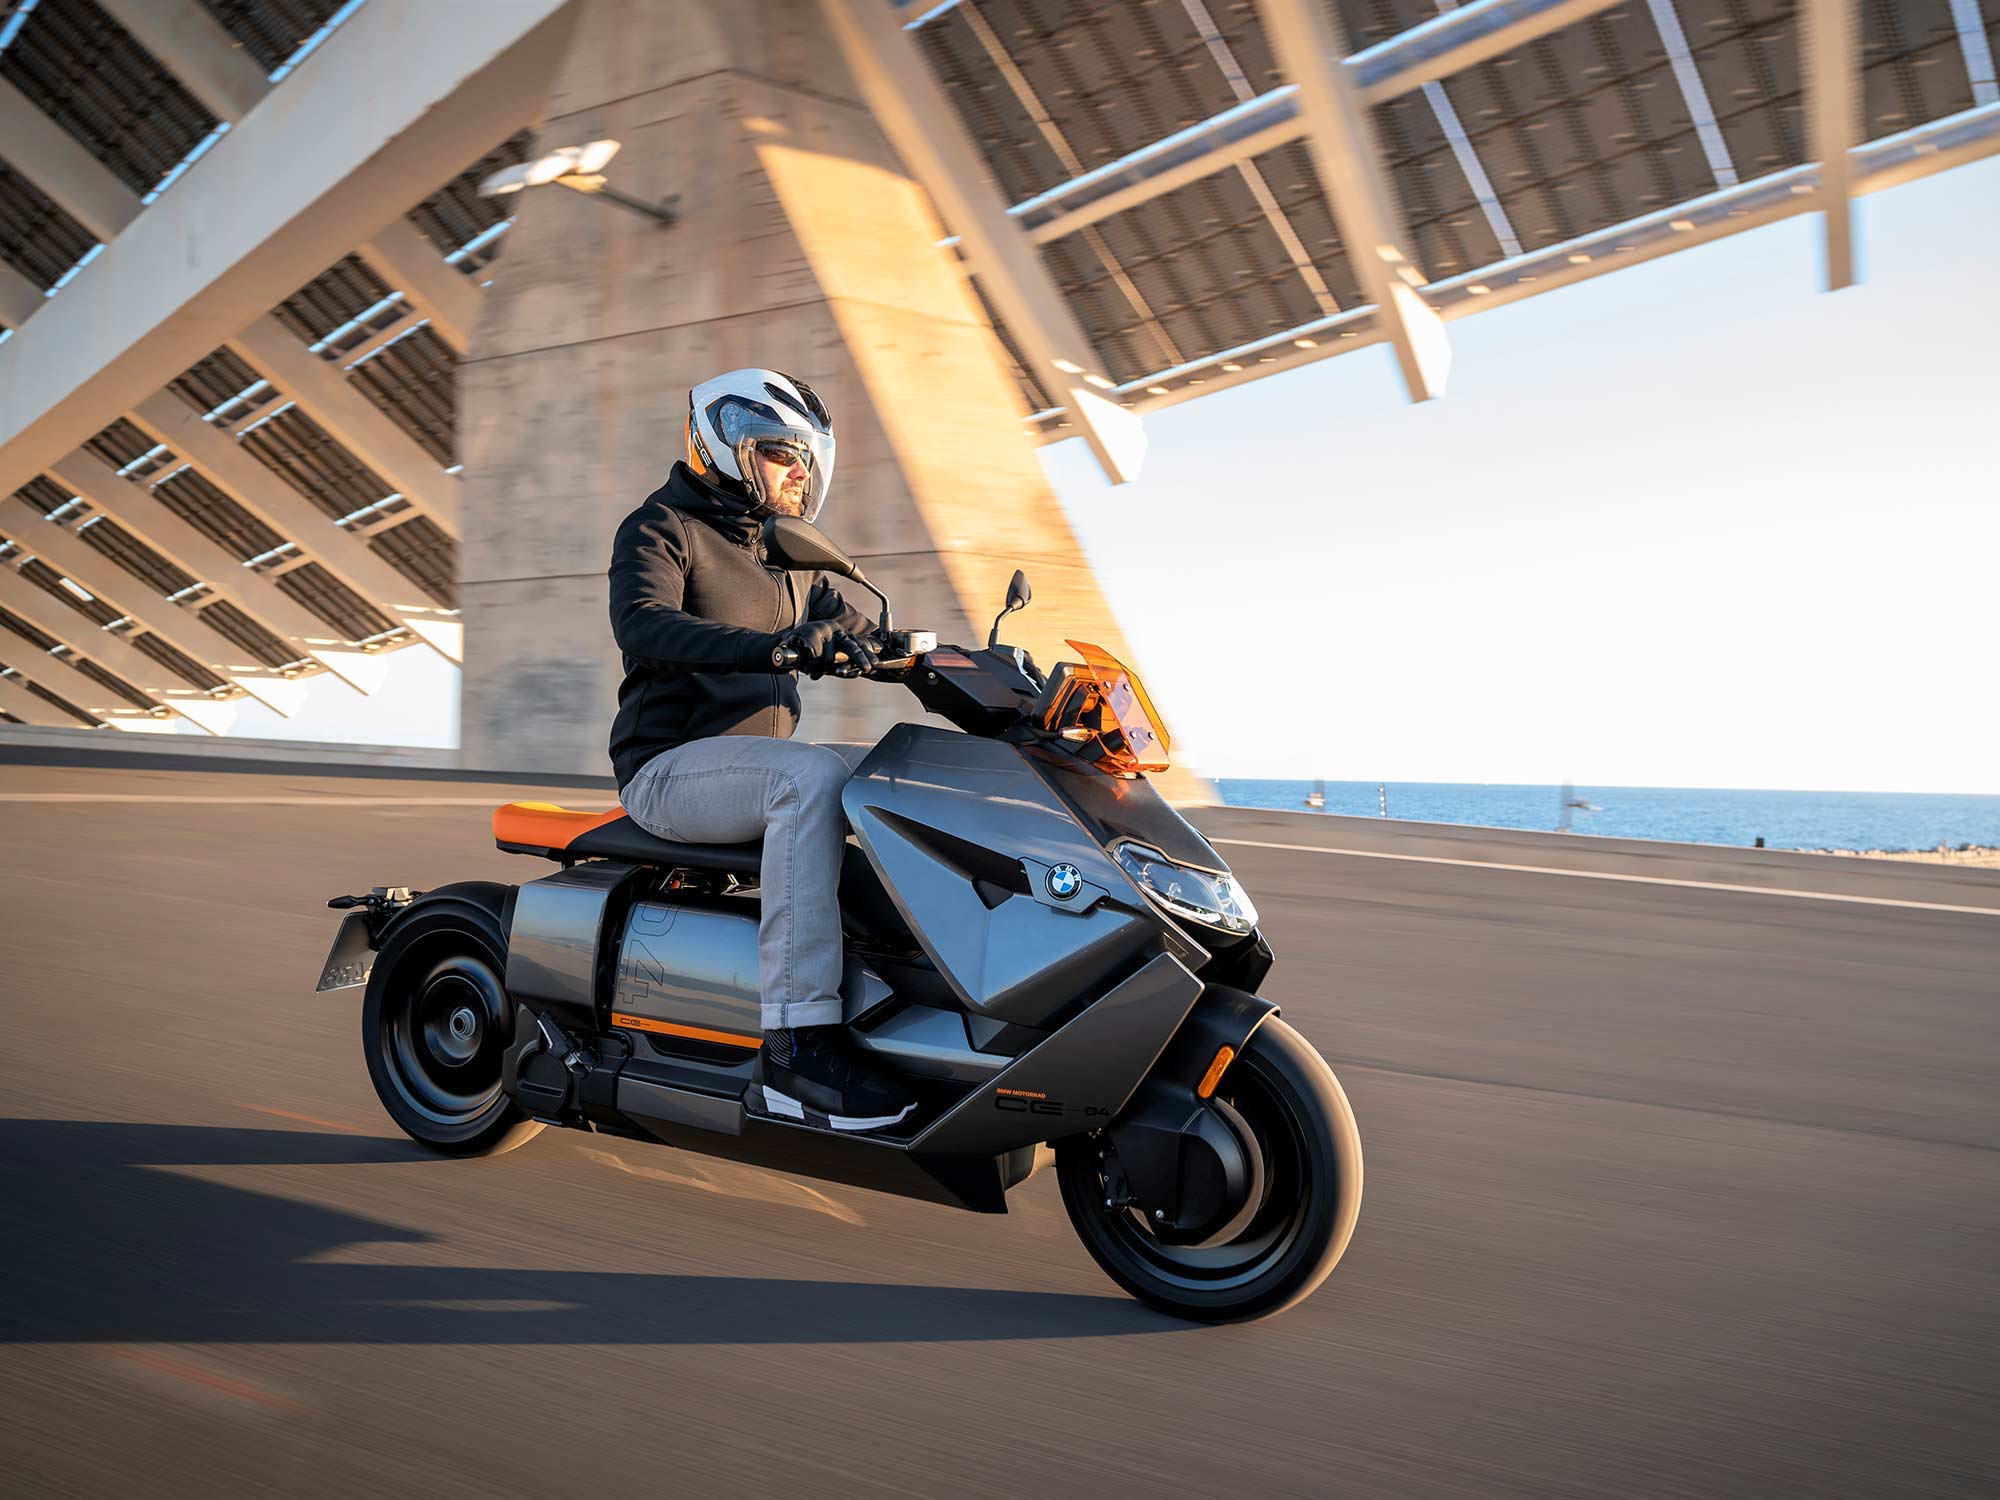 A view of BMW's electric scooter, the CE 04. Media sourced from Cycle World.